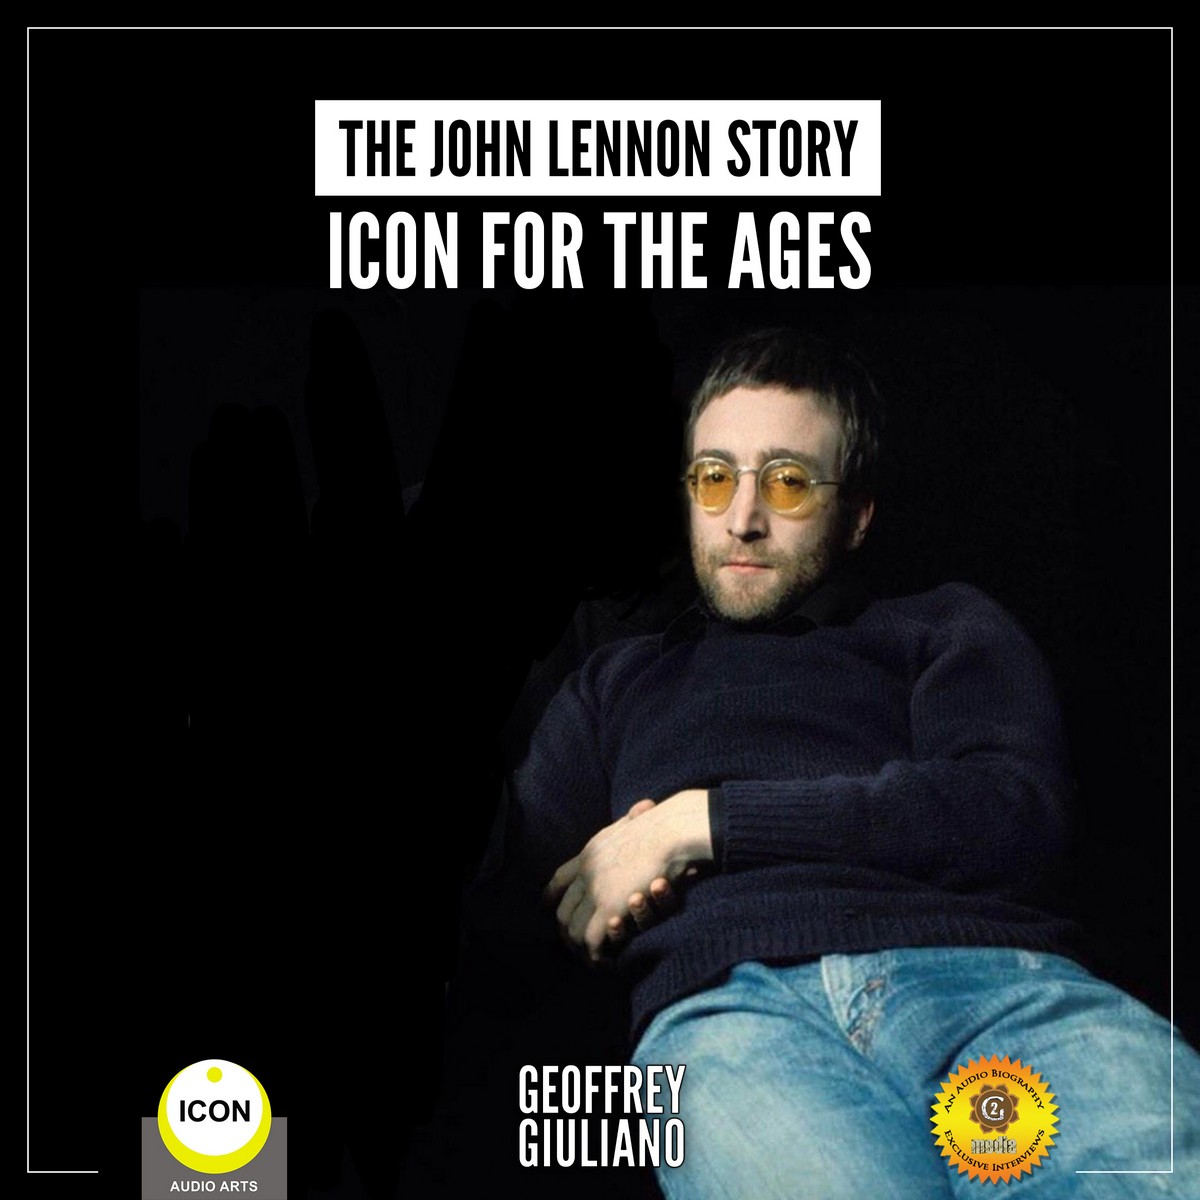 The John Lennon Story – Icon for the Ages